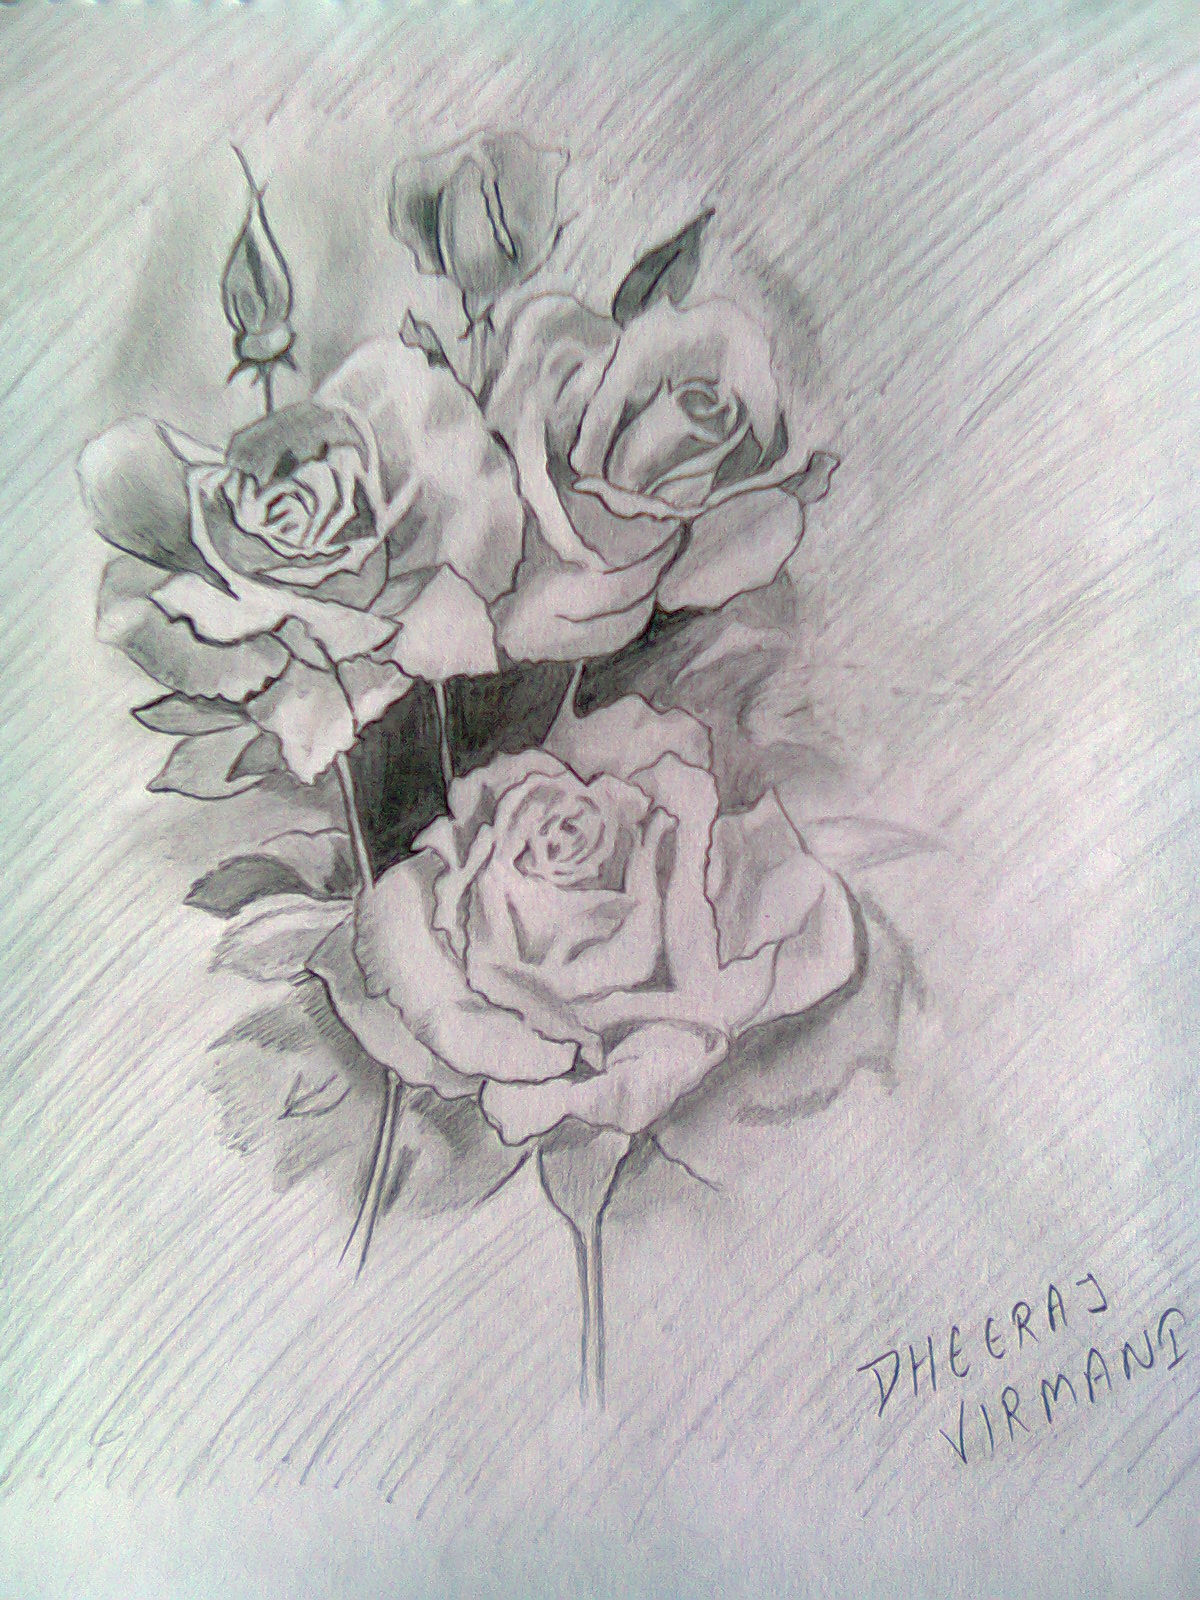 Animal Sketch Pencil Drawing Rose with simple drawing